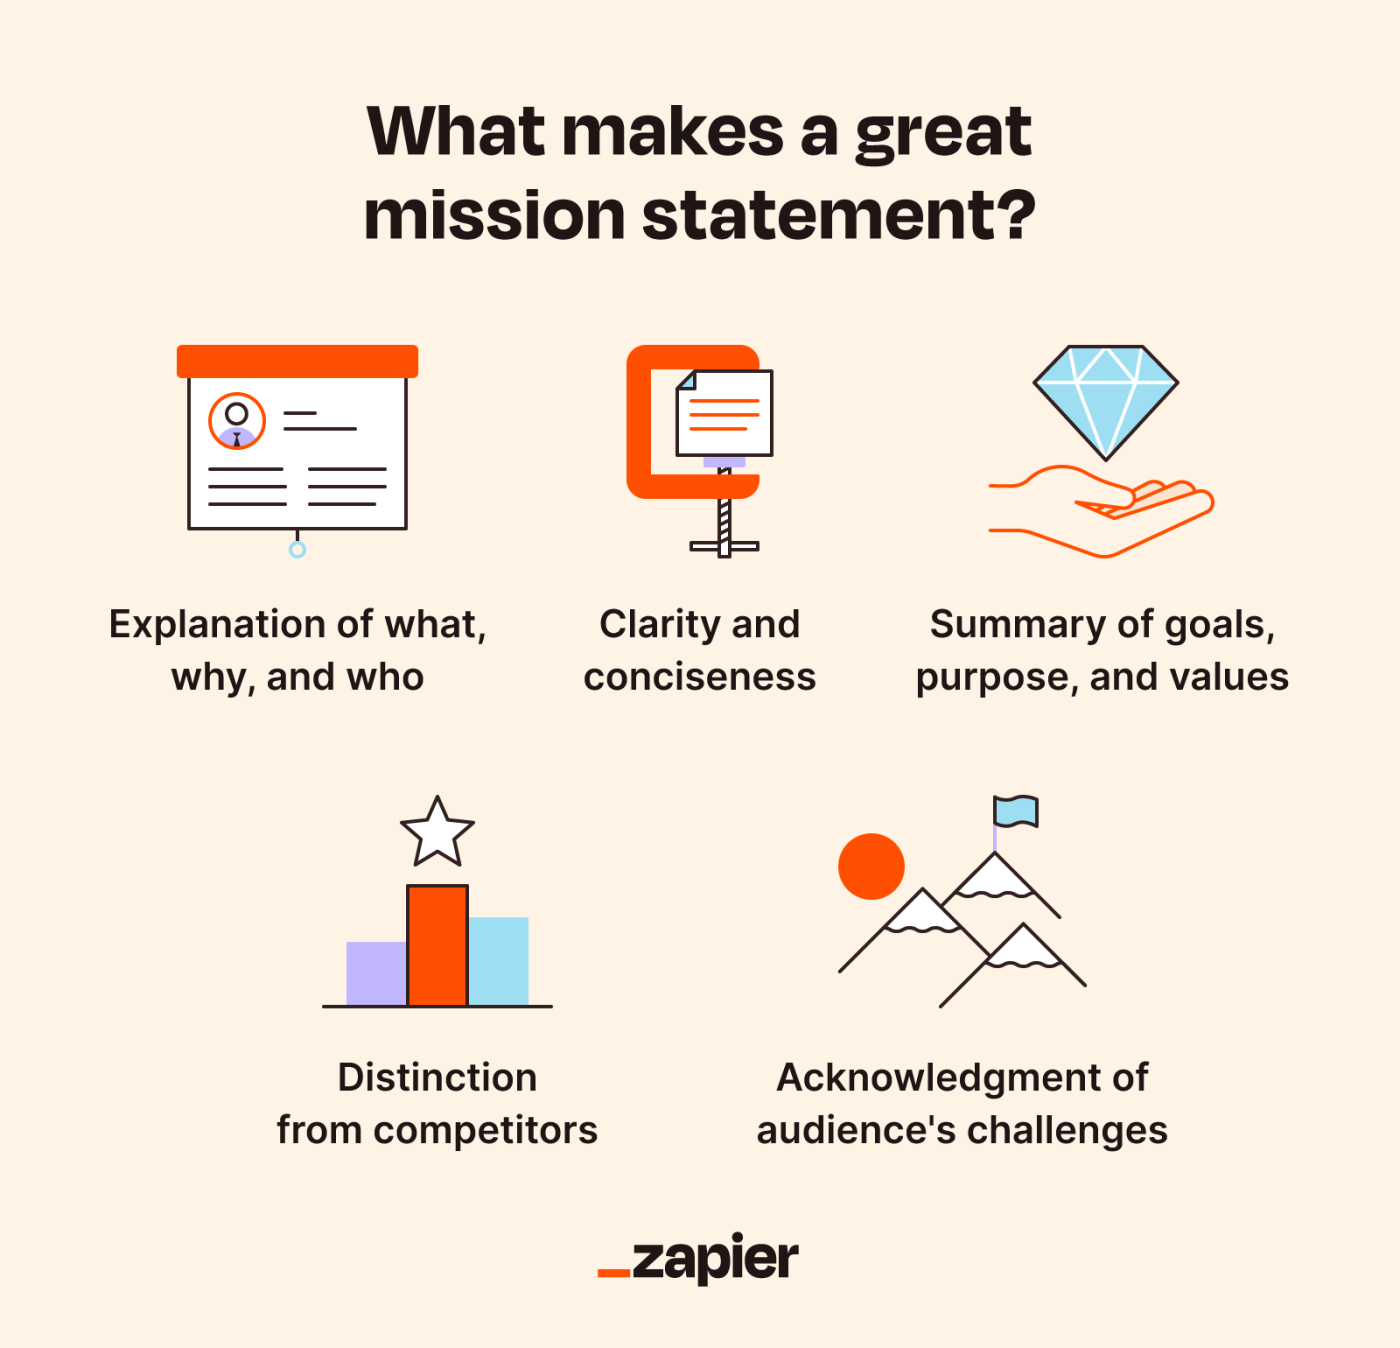 Five illustrations of a diamond, a projector, mountains with a flag, and olympic podium representing what makes a great mission statement